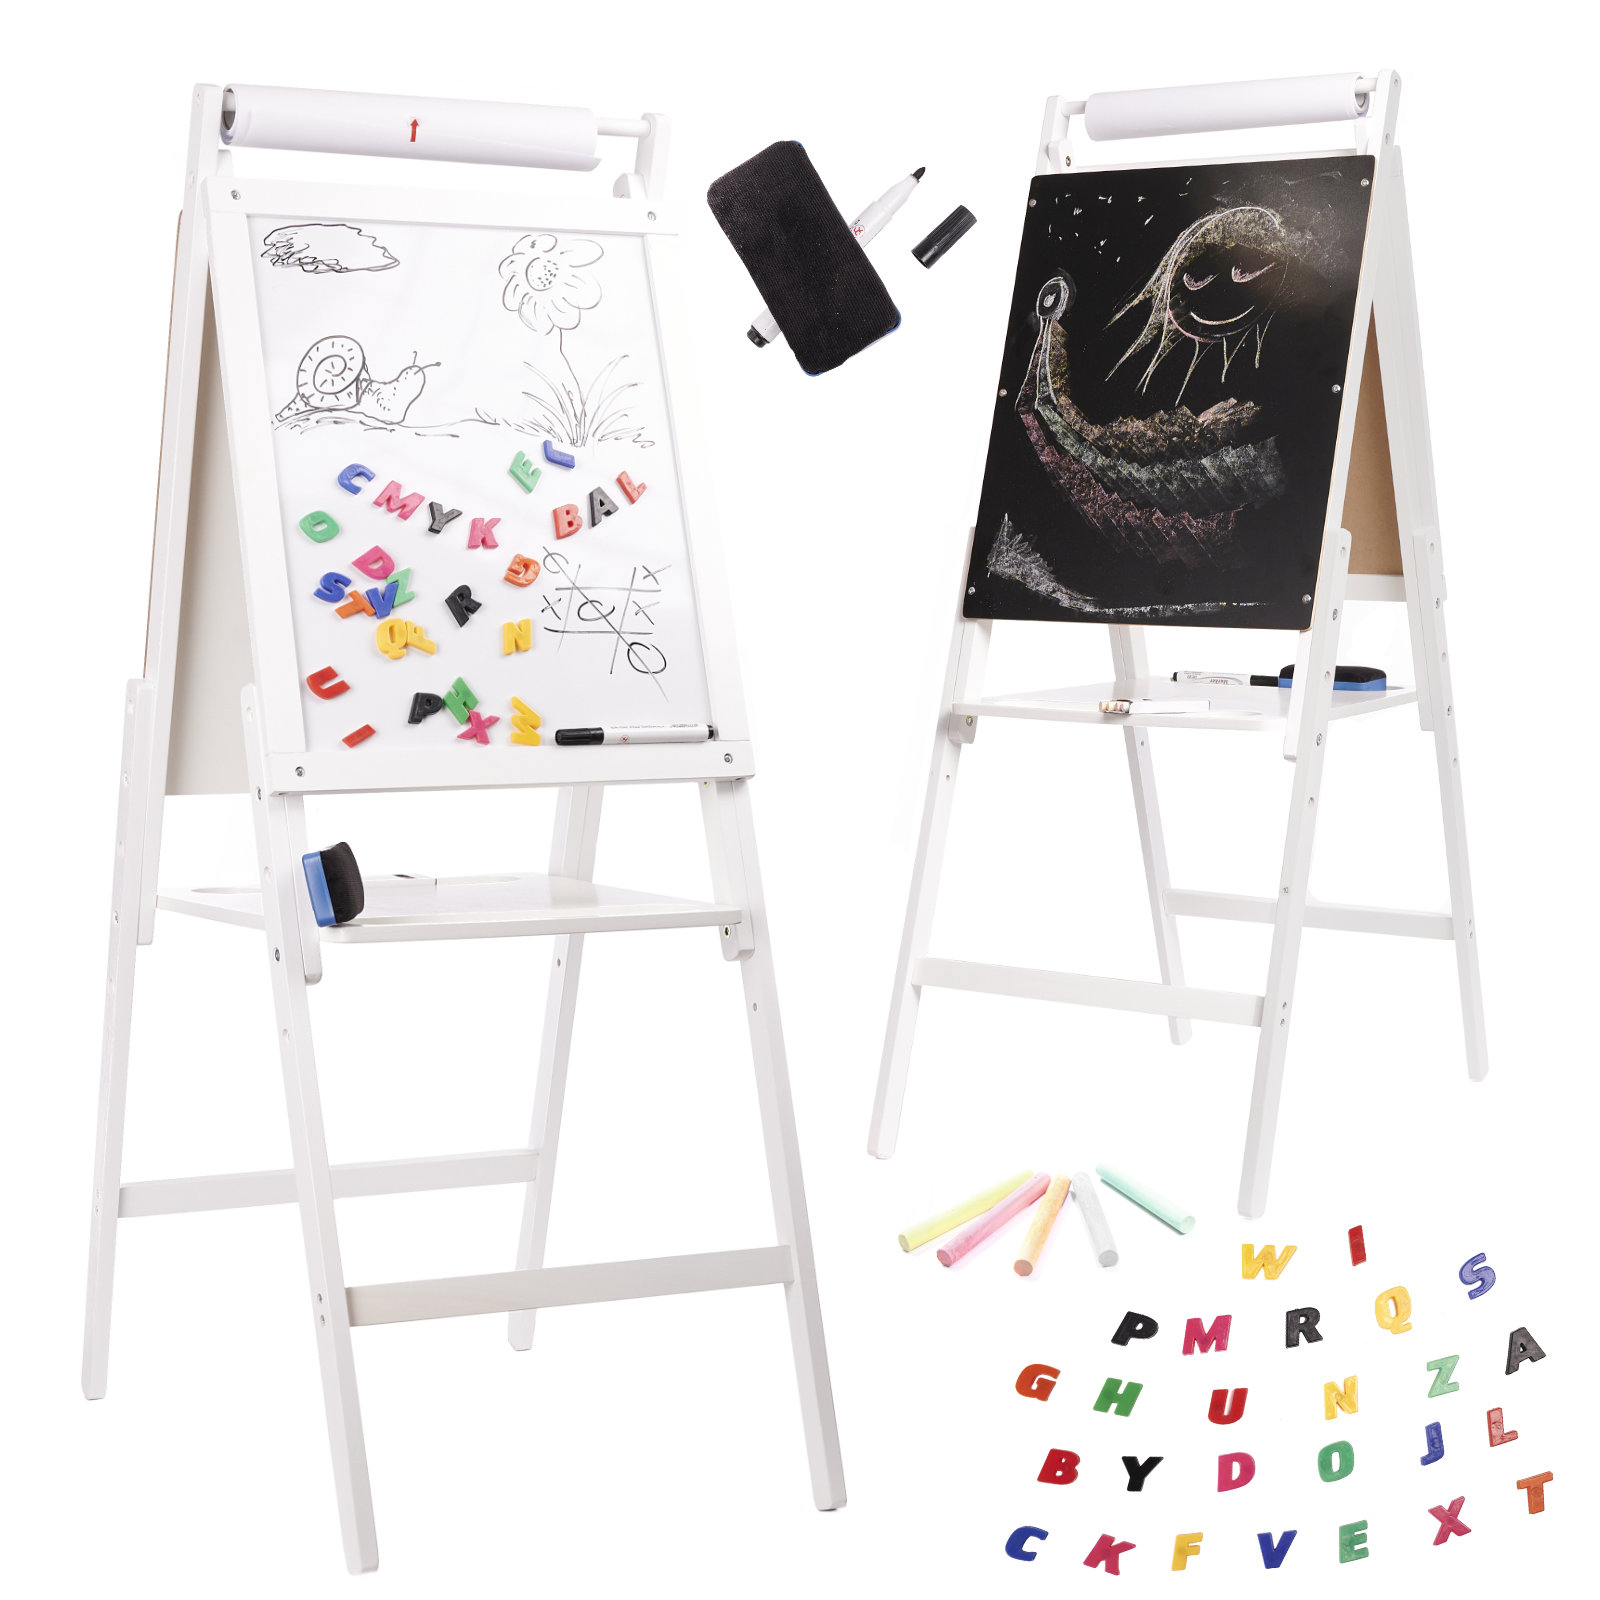 Children's Double-Sided Magnetic Drawing Board with Accessories (Crayons, Letters, Marker), White